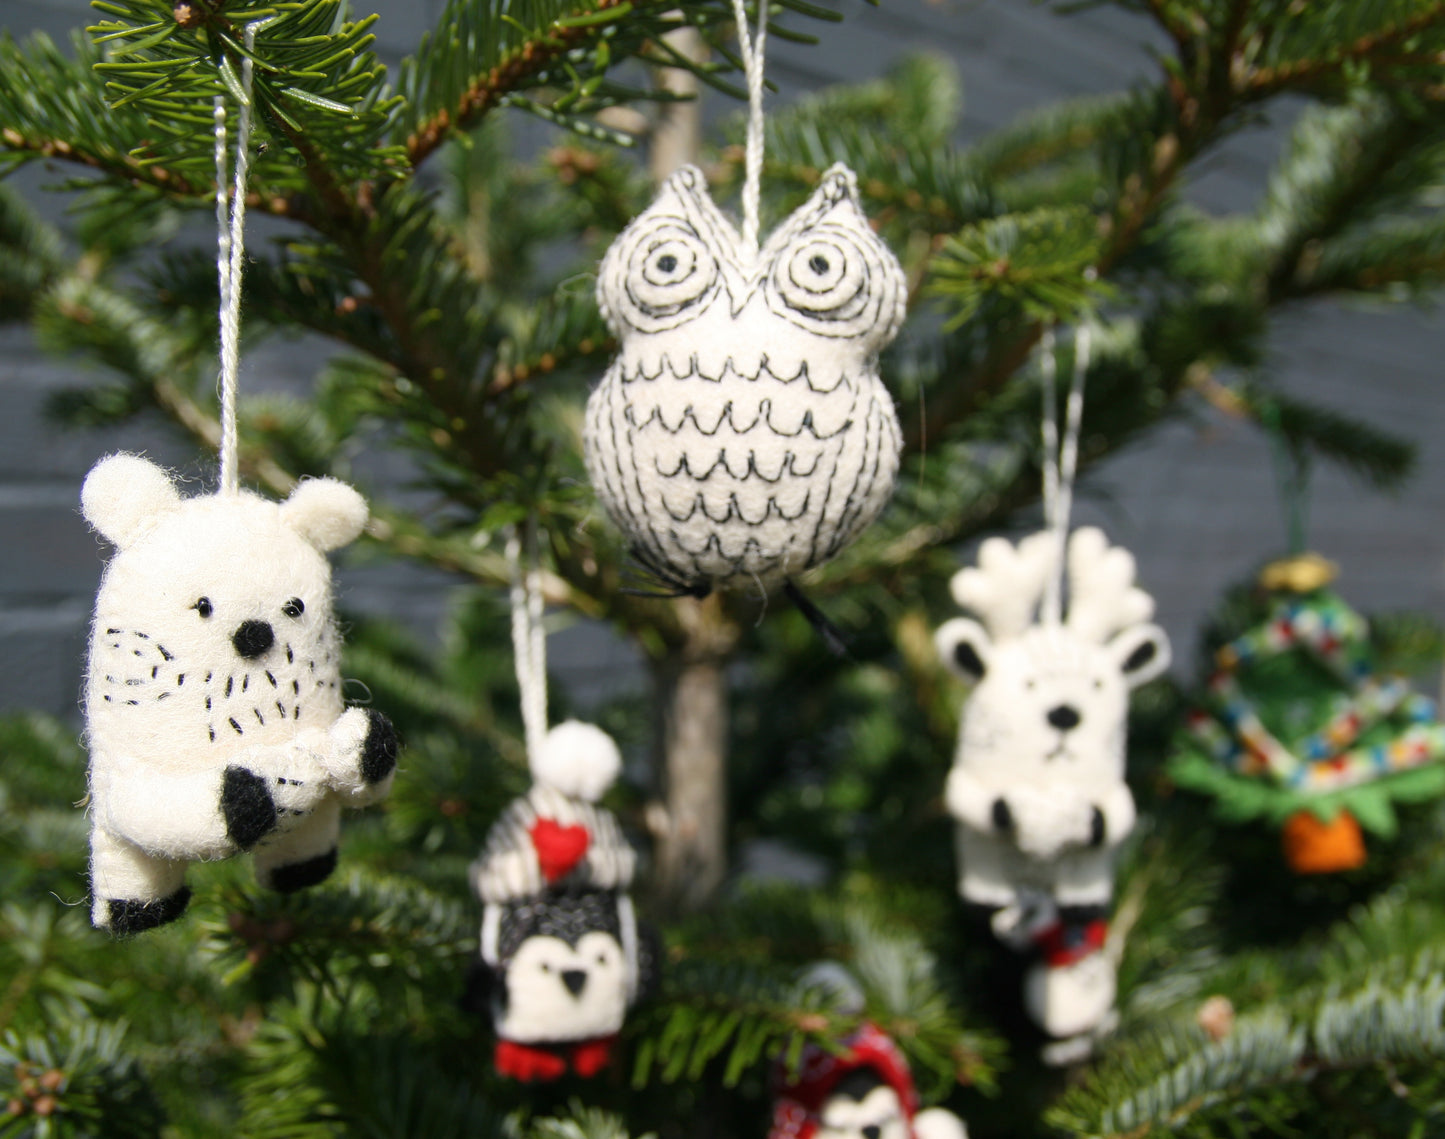 White with Black Stitch Owl Hanging Decorations - Set of 3